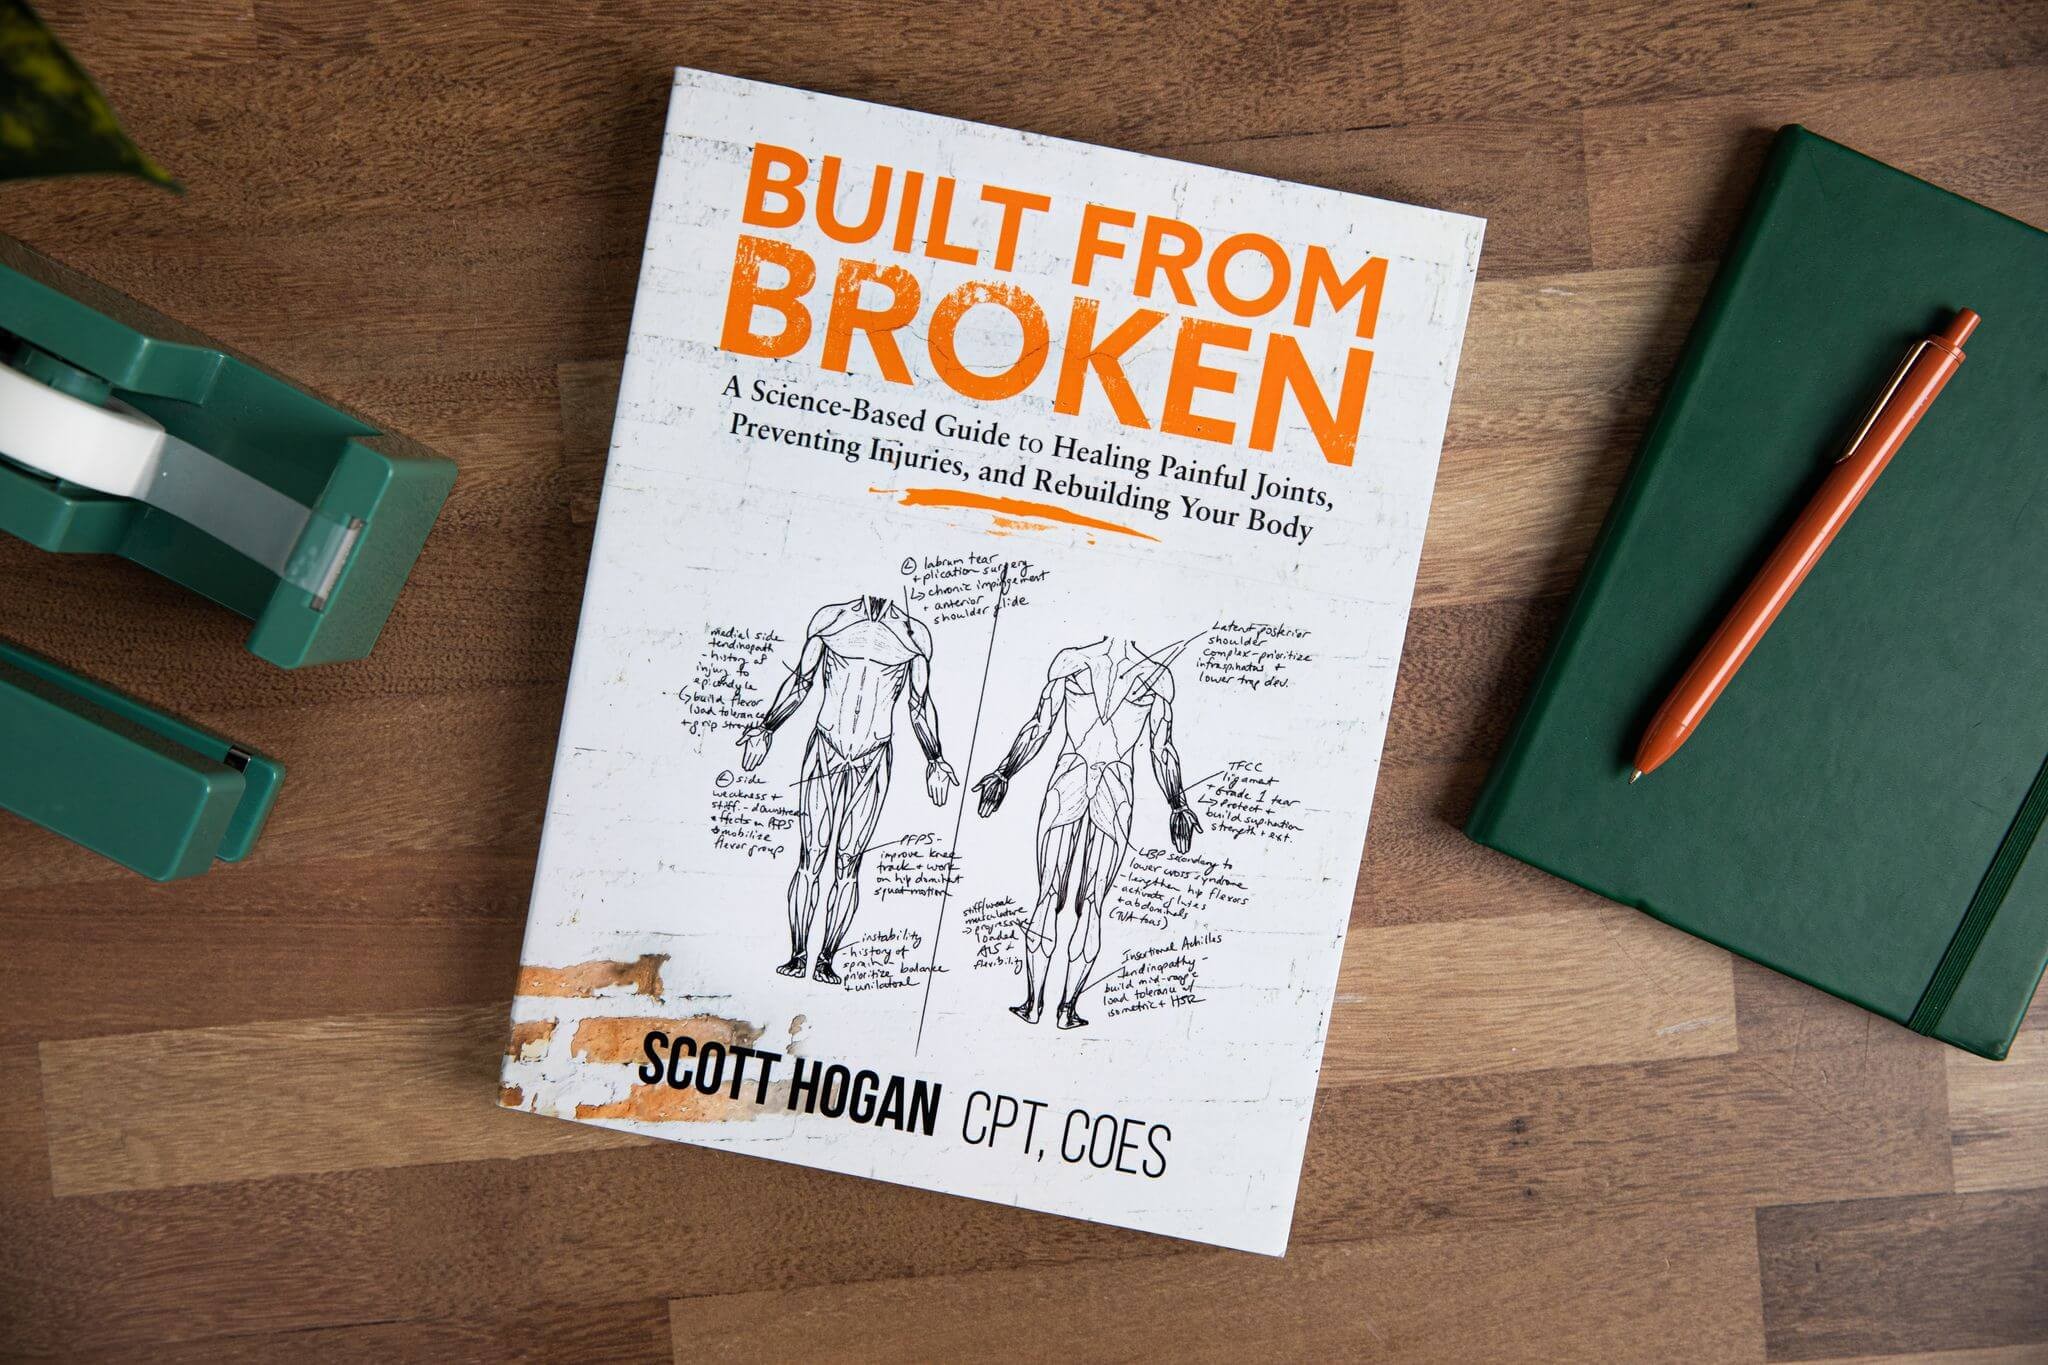 Built From Broken is a science-based guide to healing painful joints, preventing injuries, and rebuilding your body from the ground up.